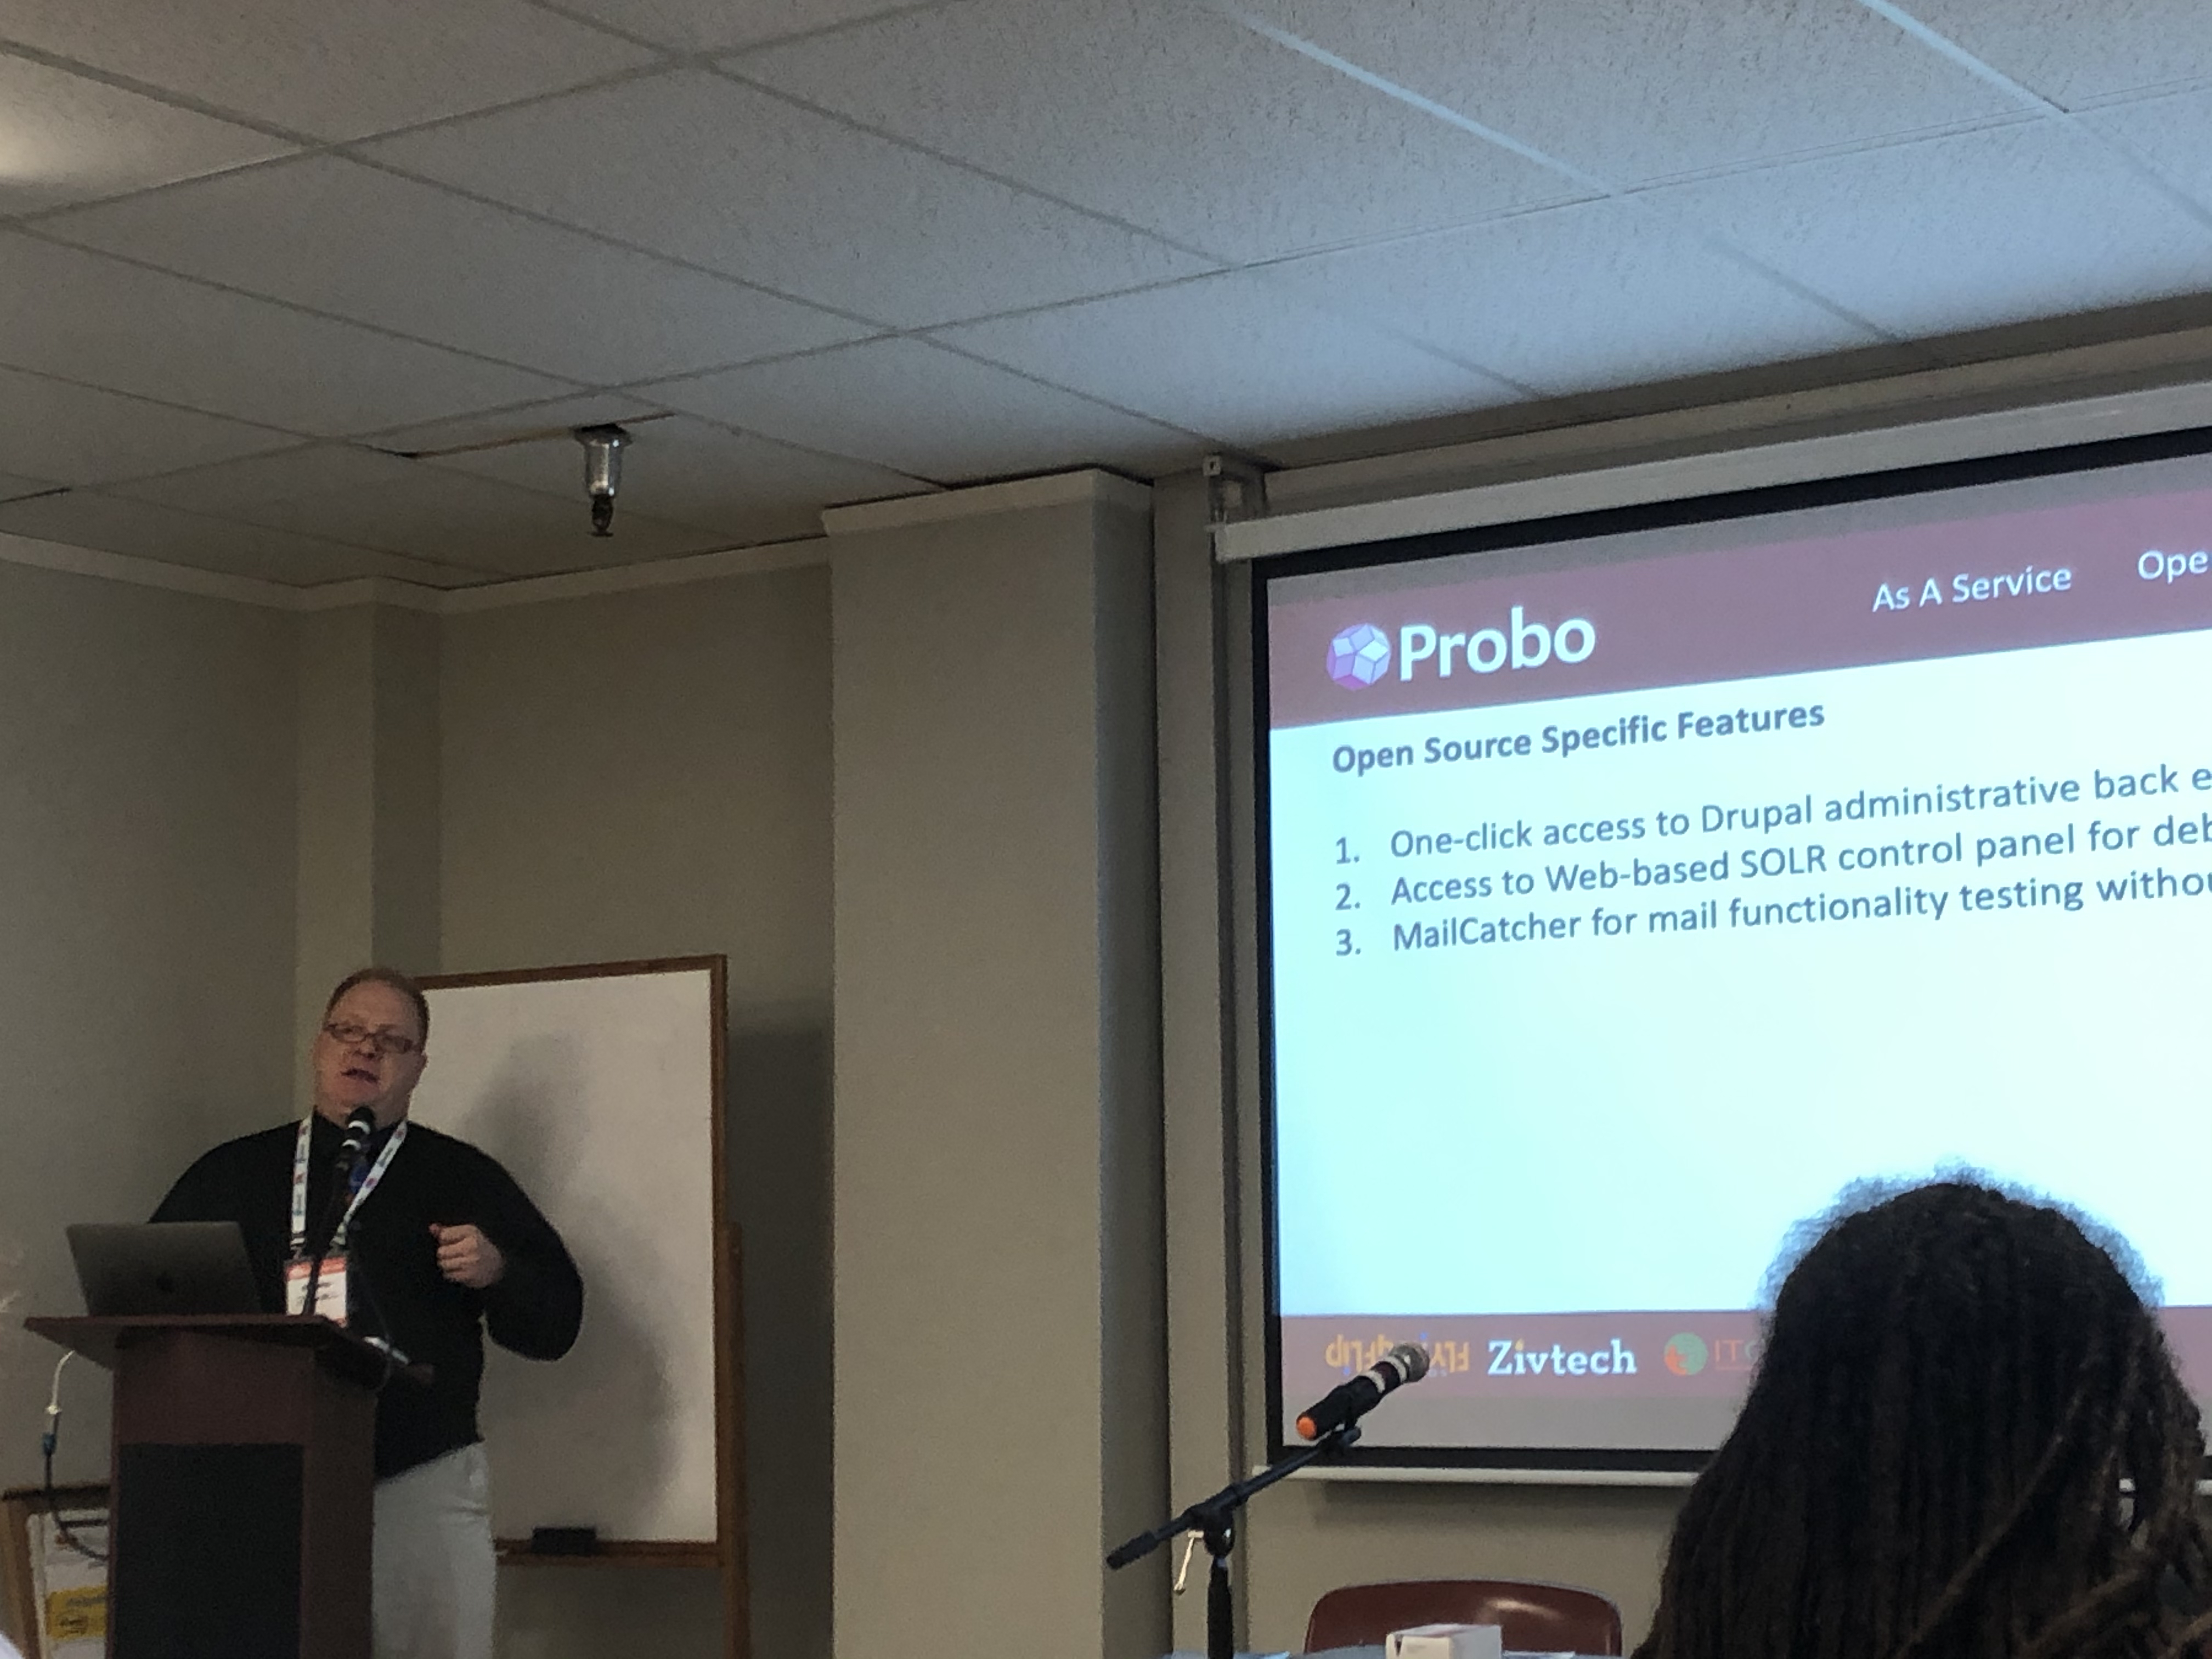 Mike giving a presentation about Probo CI